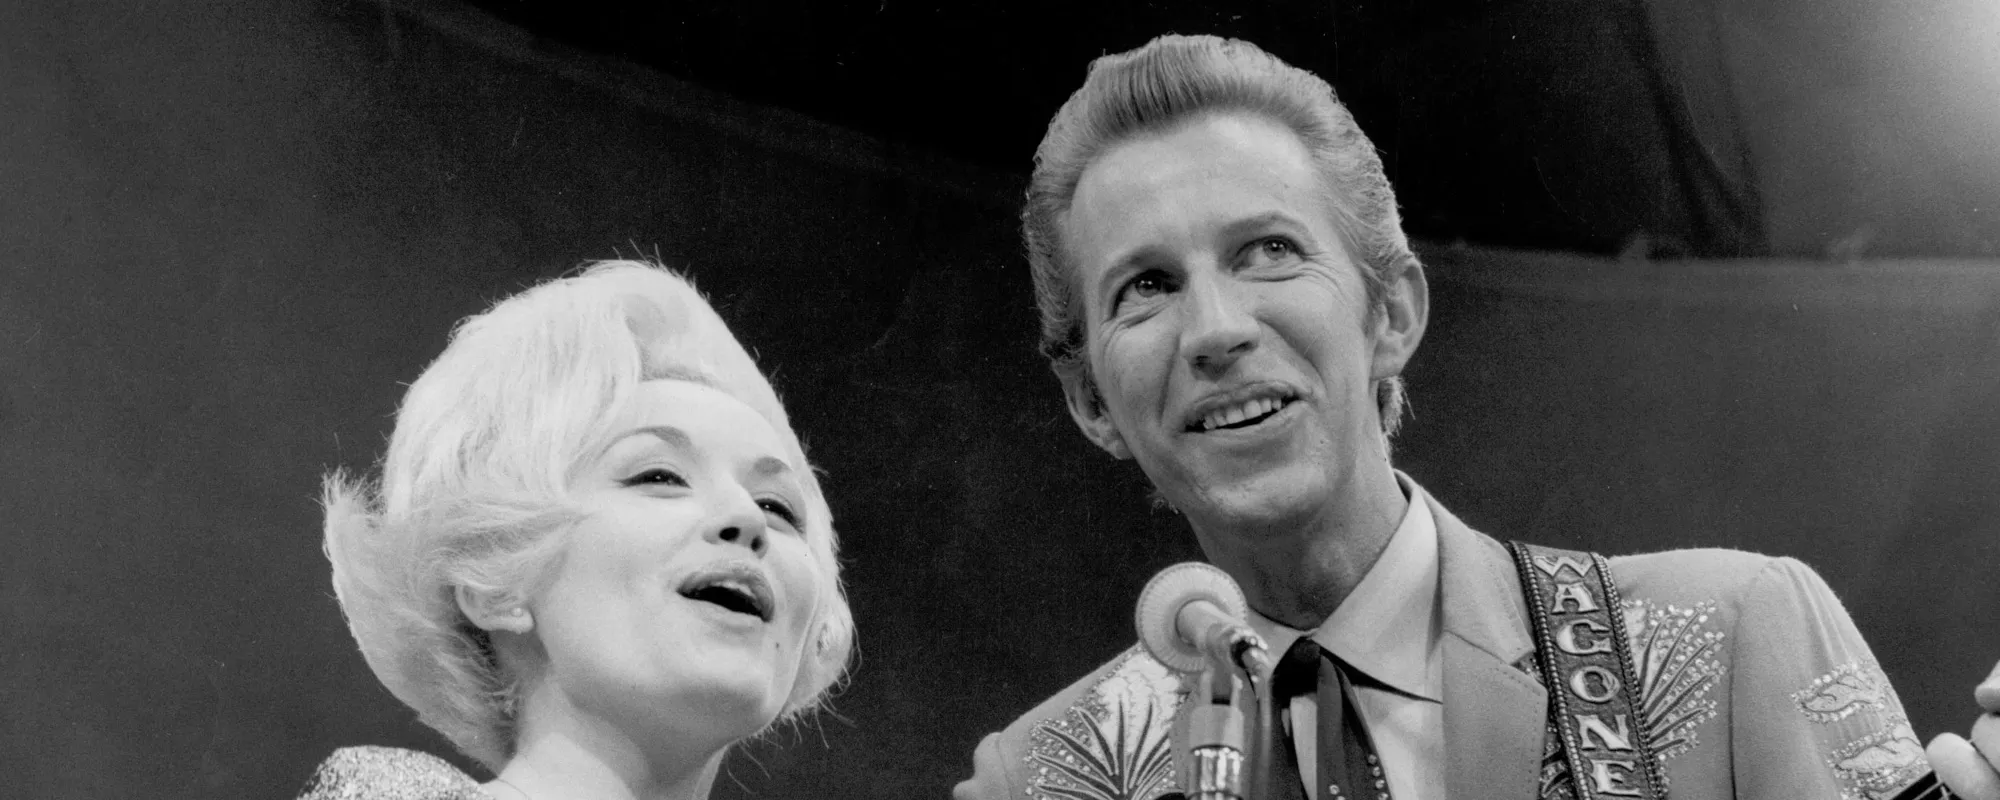 5 Best Country Duos of the ’70s